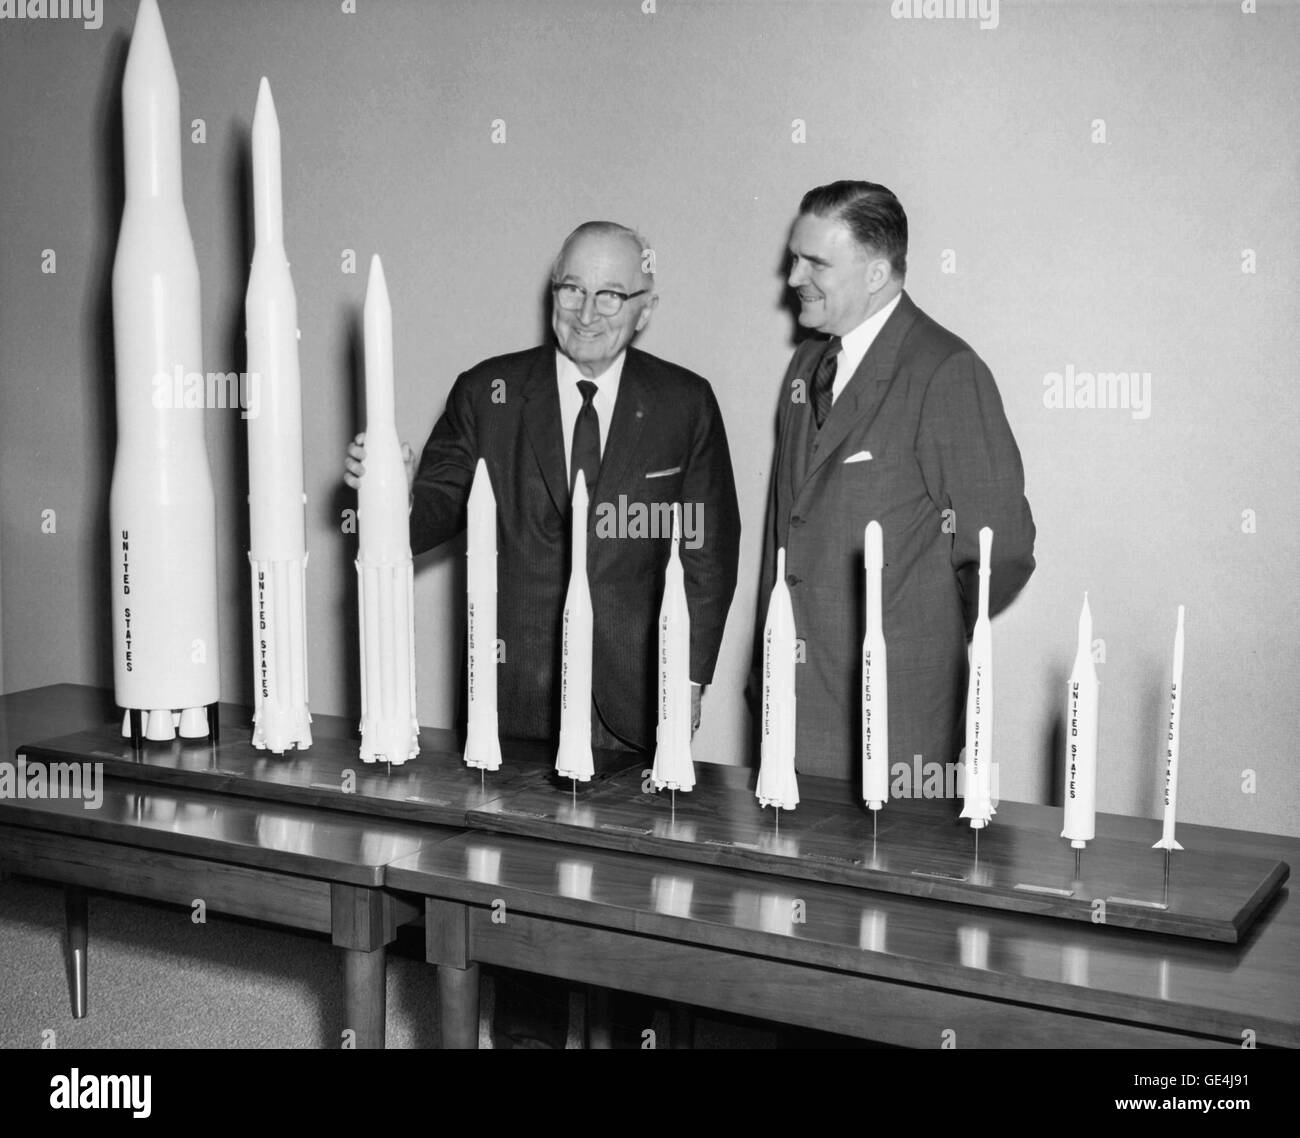 On November 3, 1961 former President Harry S. Truman visited the newly opened NASA Headquarters, Washington D.C. Accompanied by former NASA Administrator James E. Webb, he was presented with a collection of rocket models for his Presidential Library in Independence, Missouri.                                                Image # : TRUMAN-ROCKETS Stock Photo